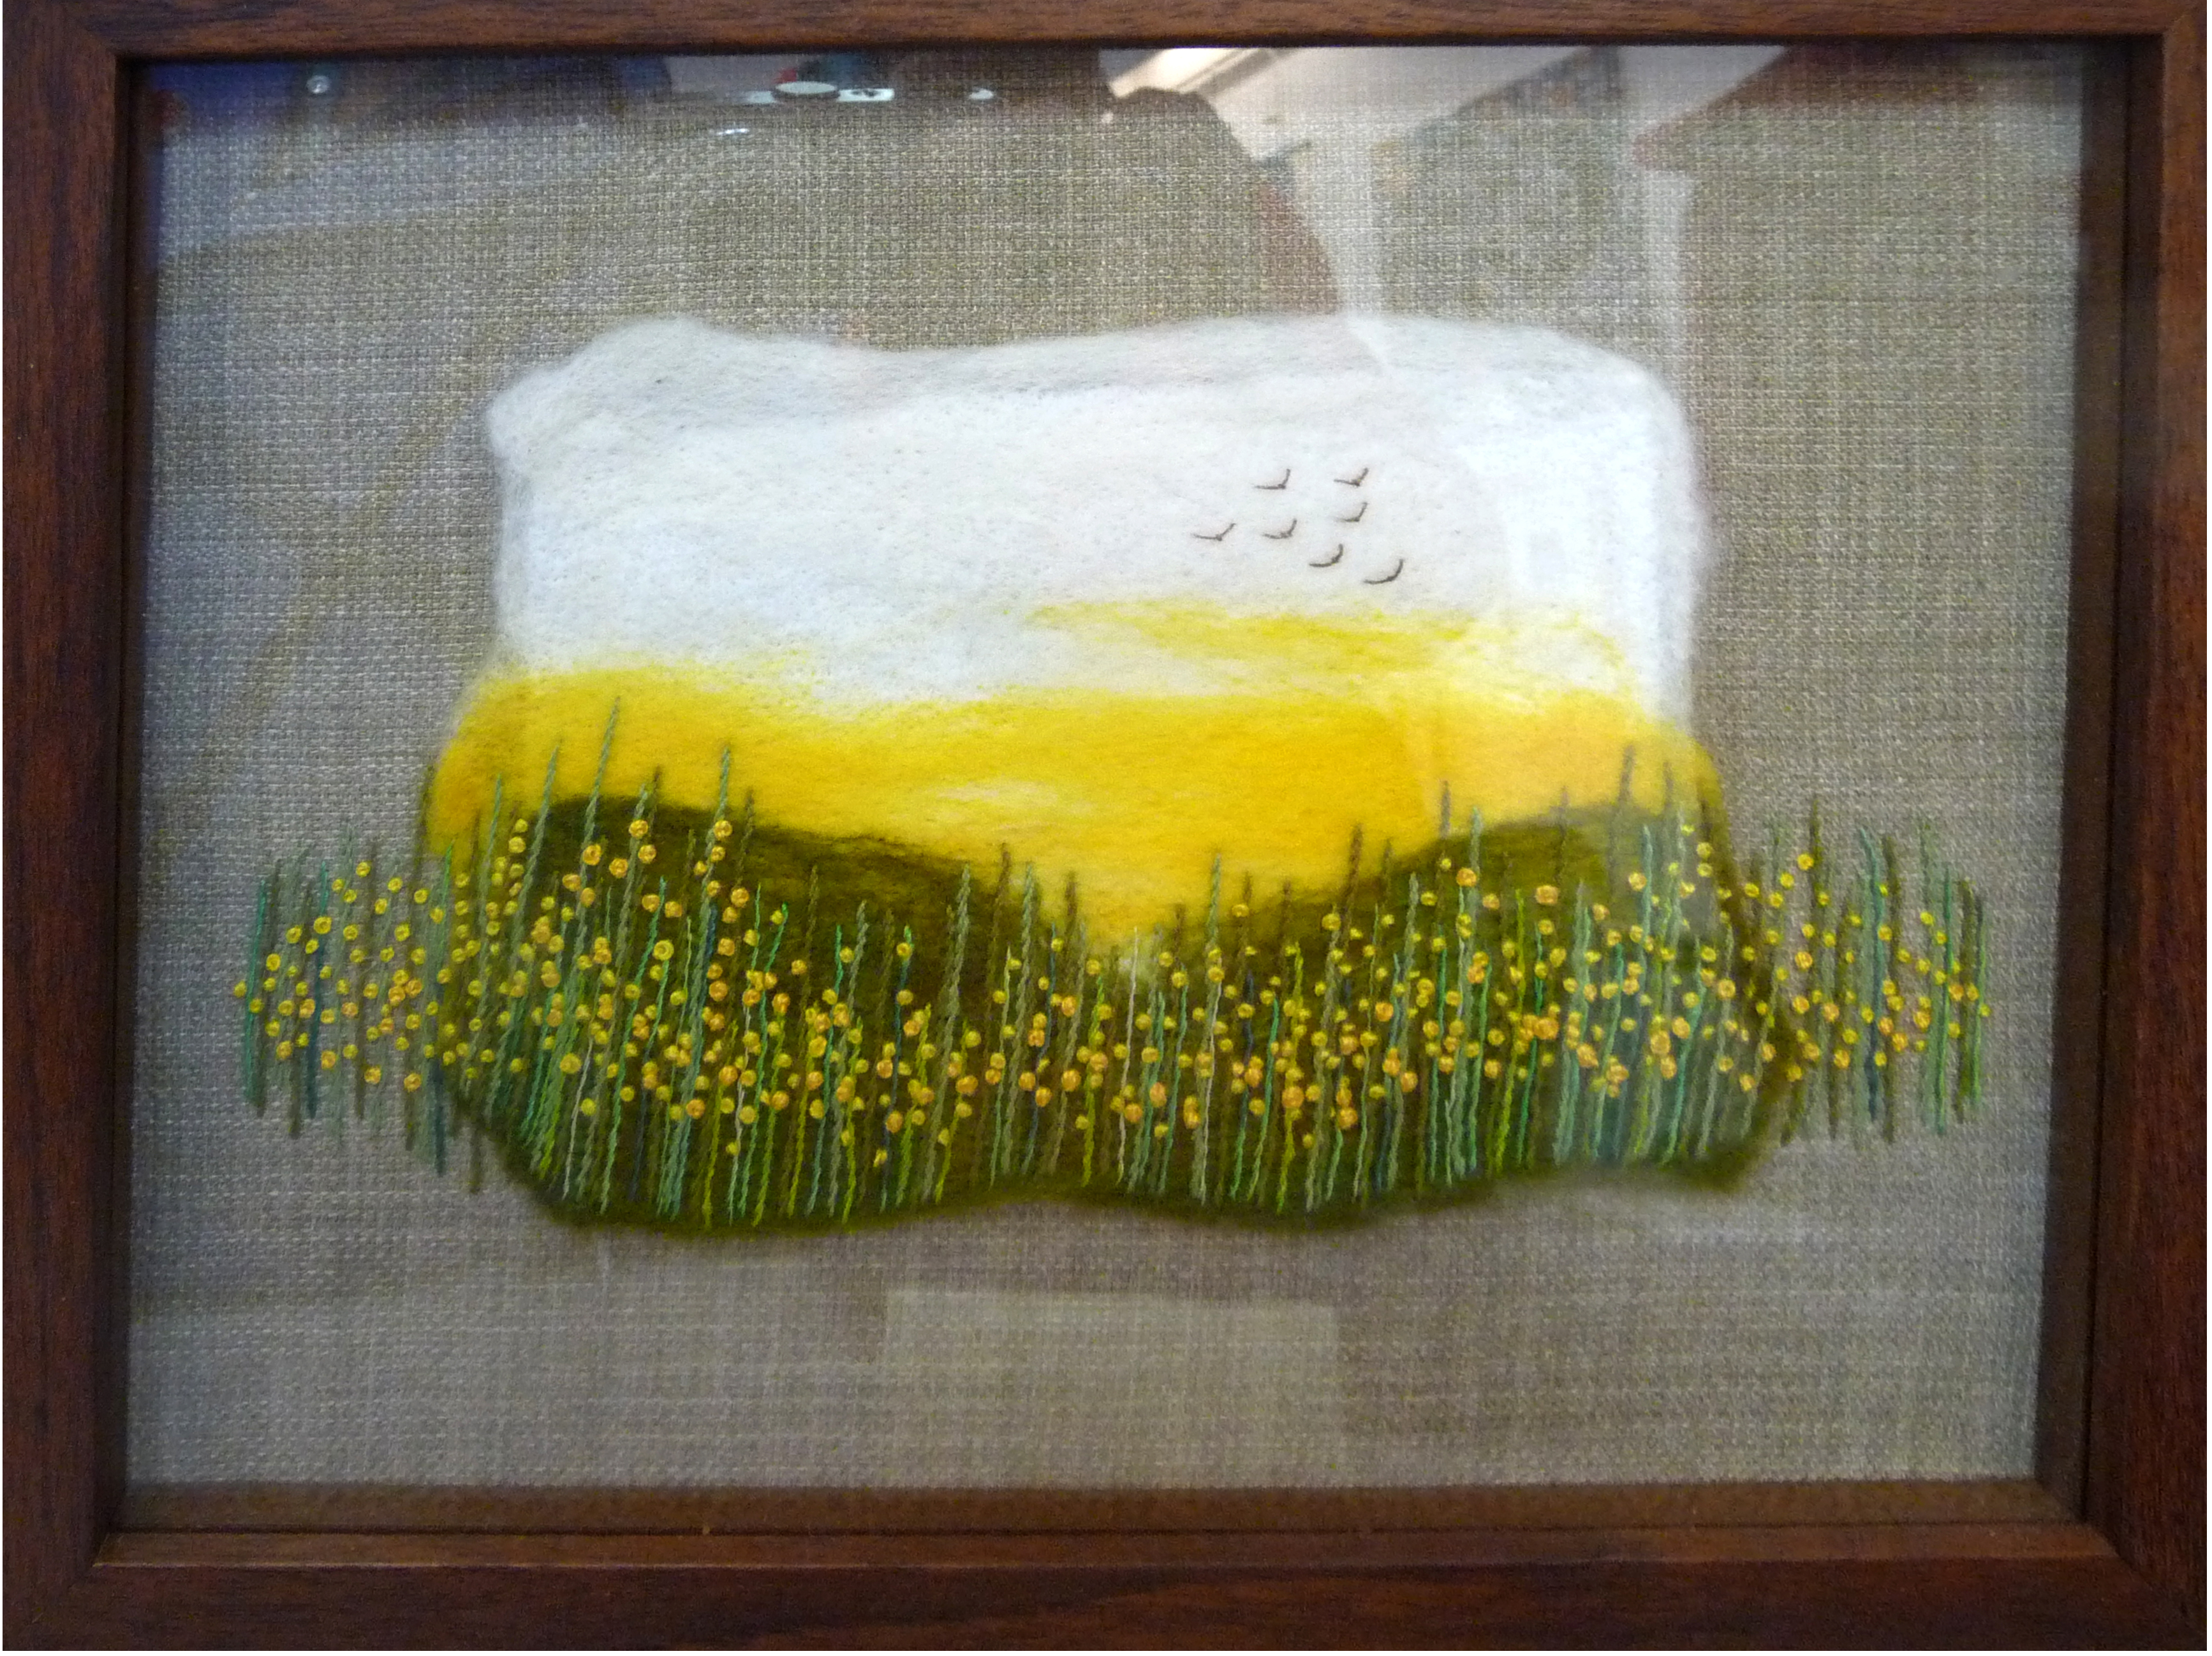 SAFFRON MEADOW by Suzanne Snape, felt and handstitch